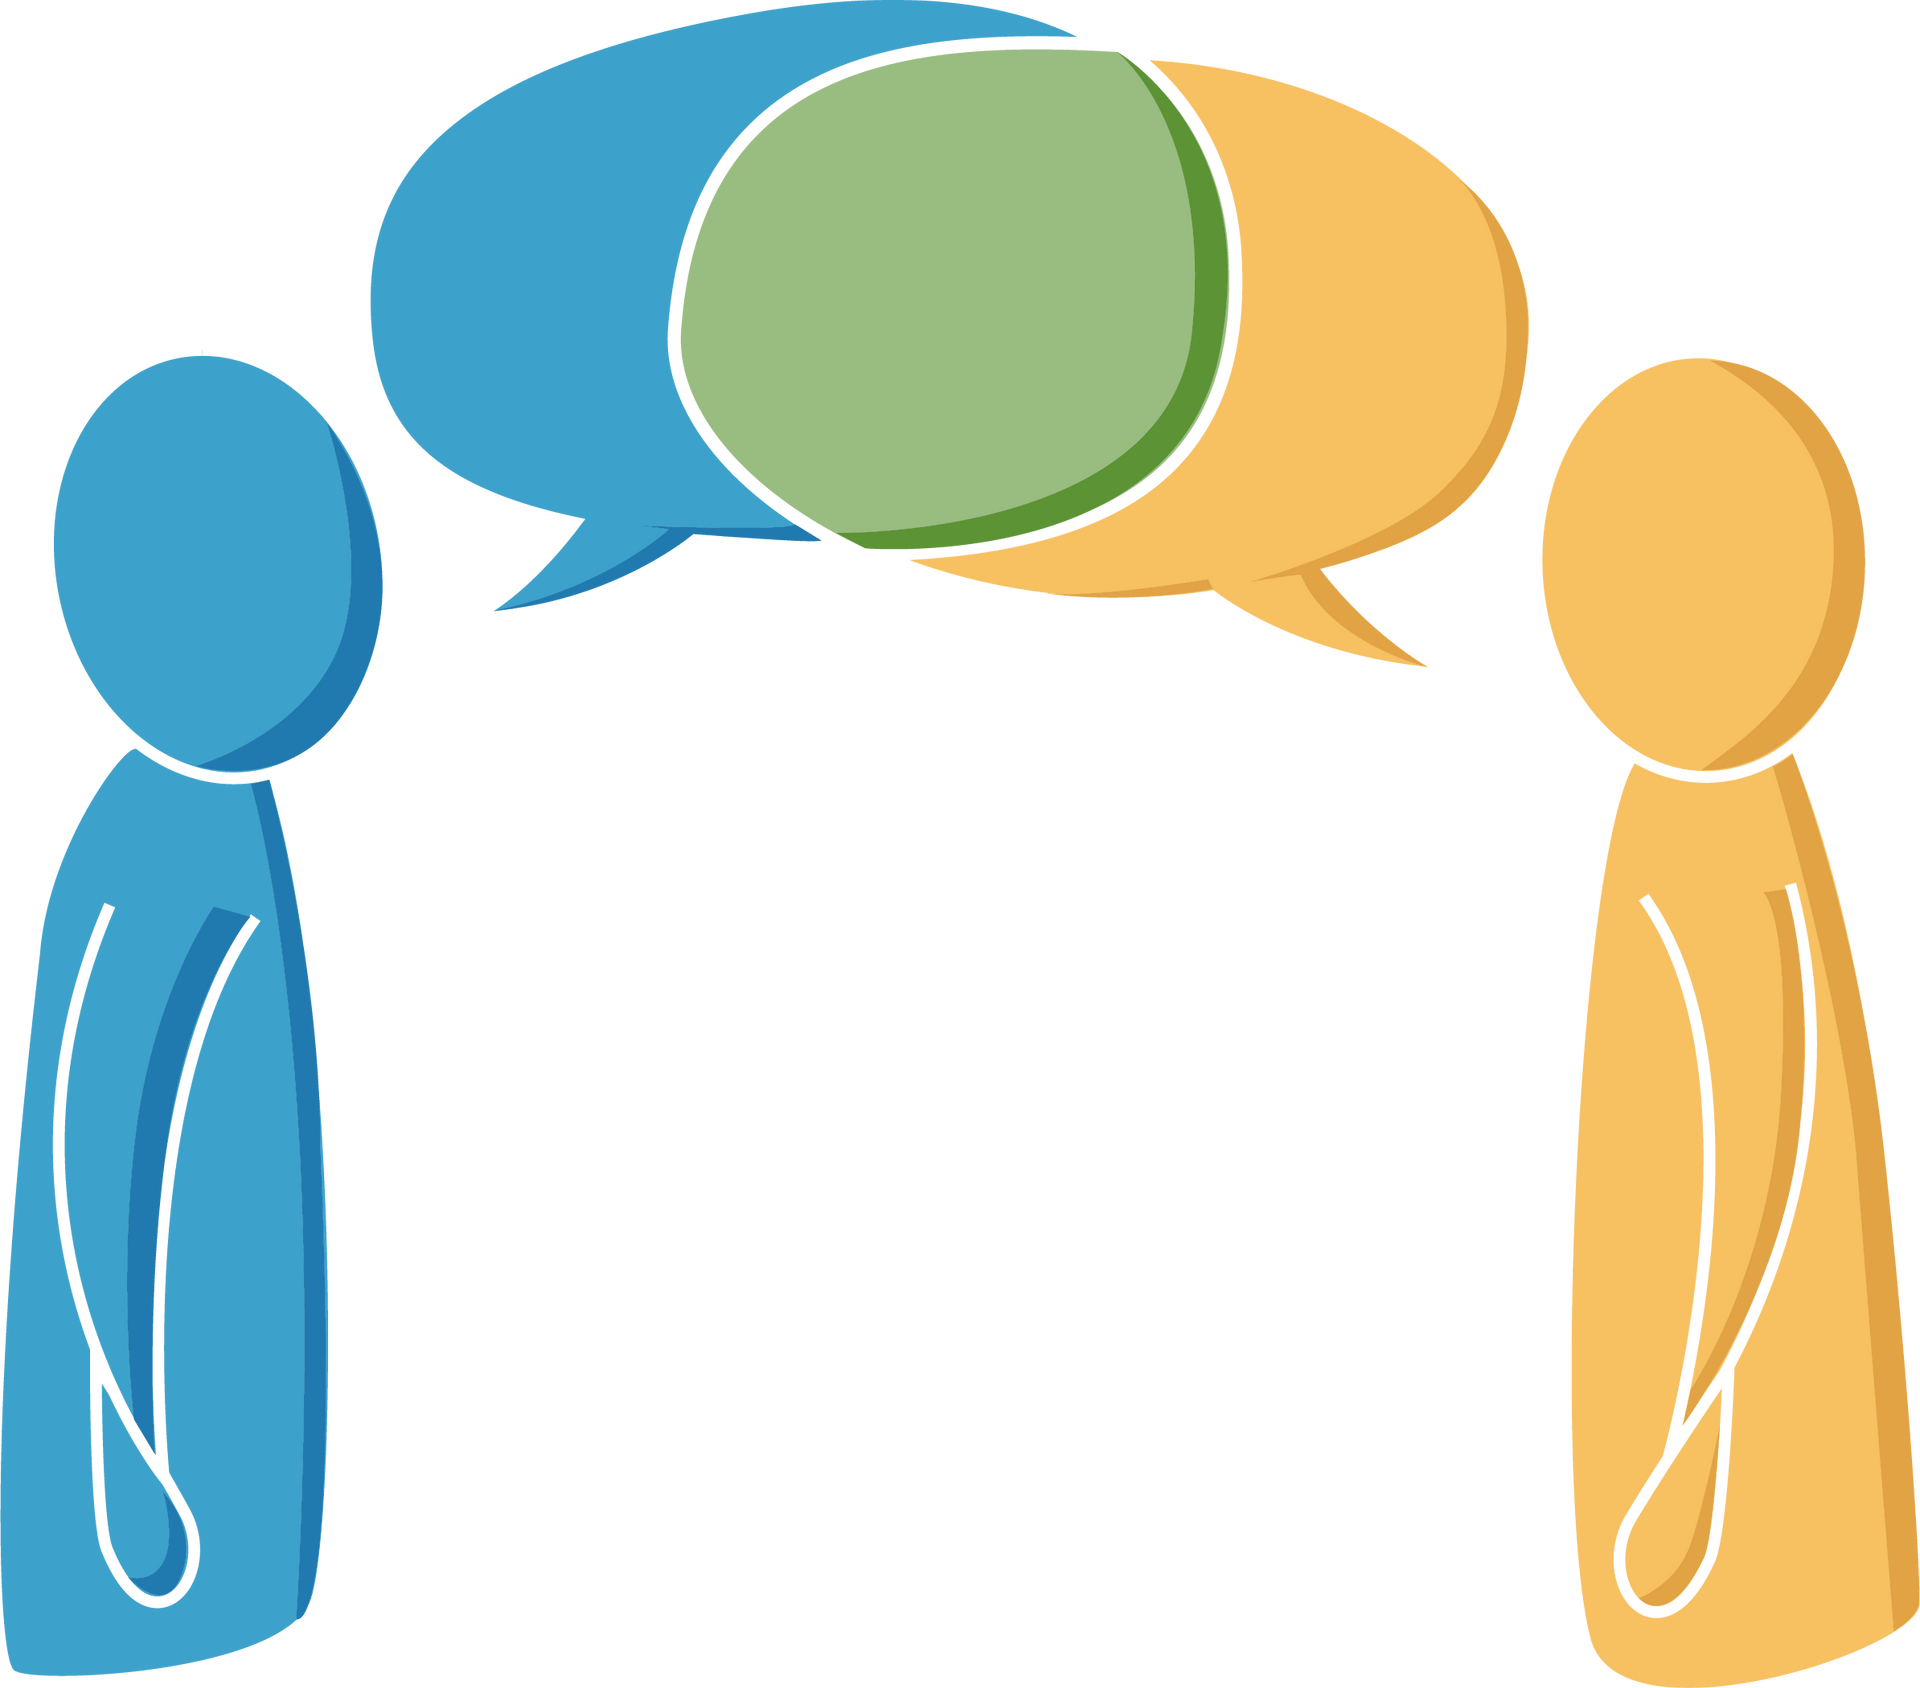 A cartoon outline of two people talking to each other. The figure on the left is colored blue, the one on the right is yellow. Where their talk bubbles overlap is green.